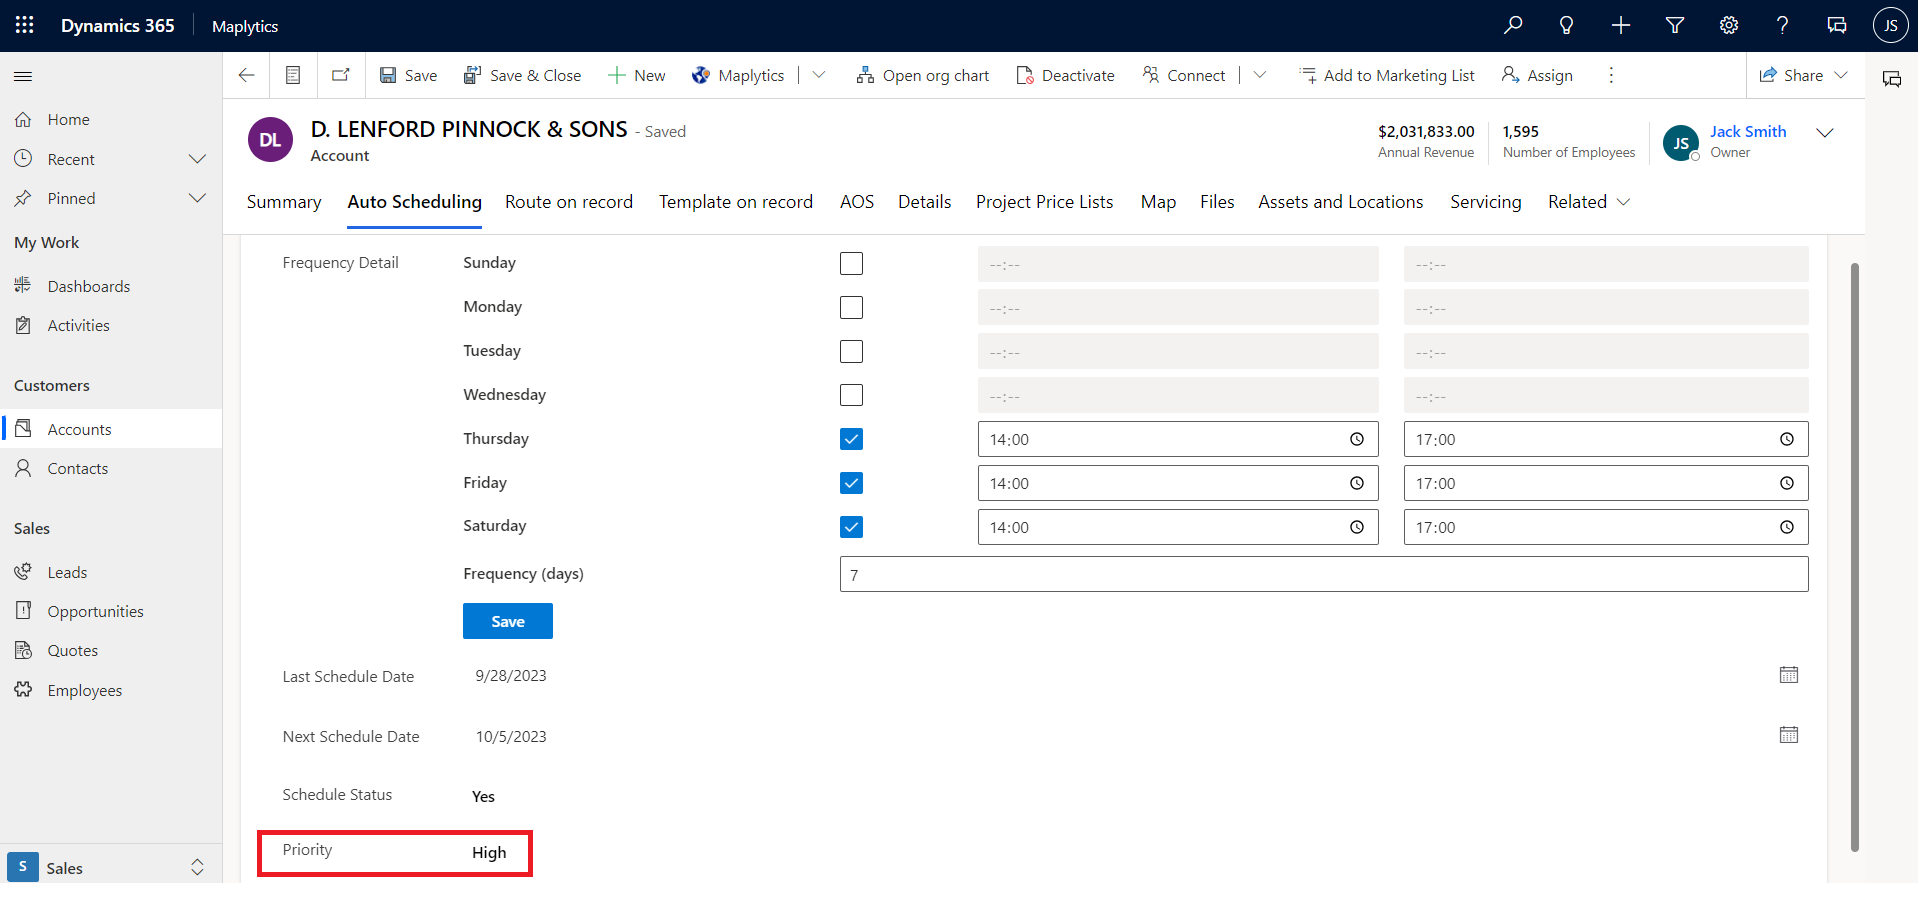 Scheduling in Dynamics 365 CRM